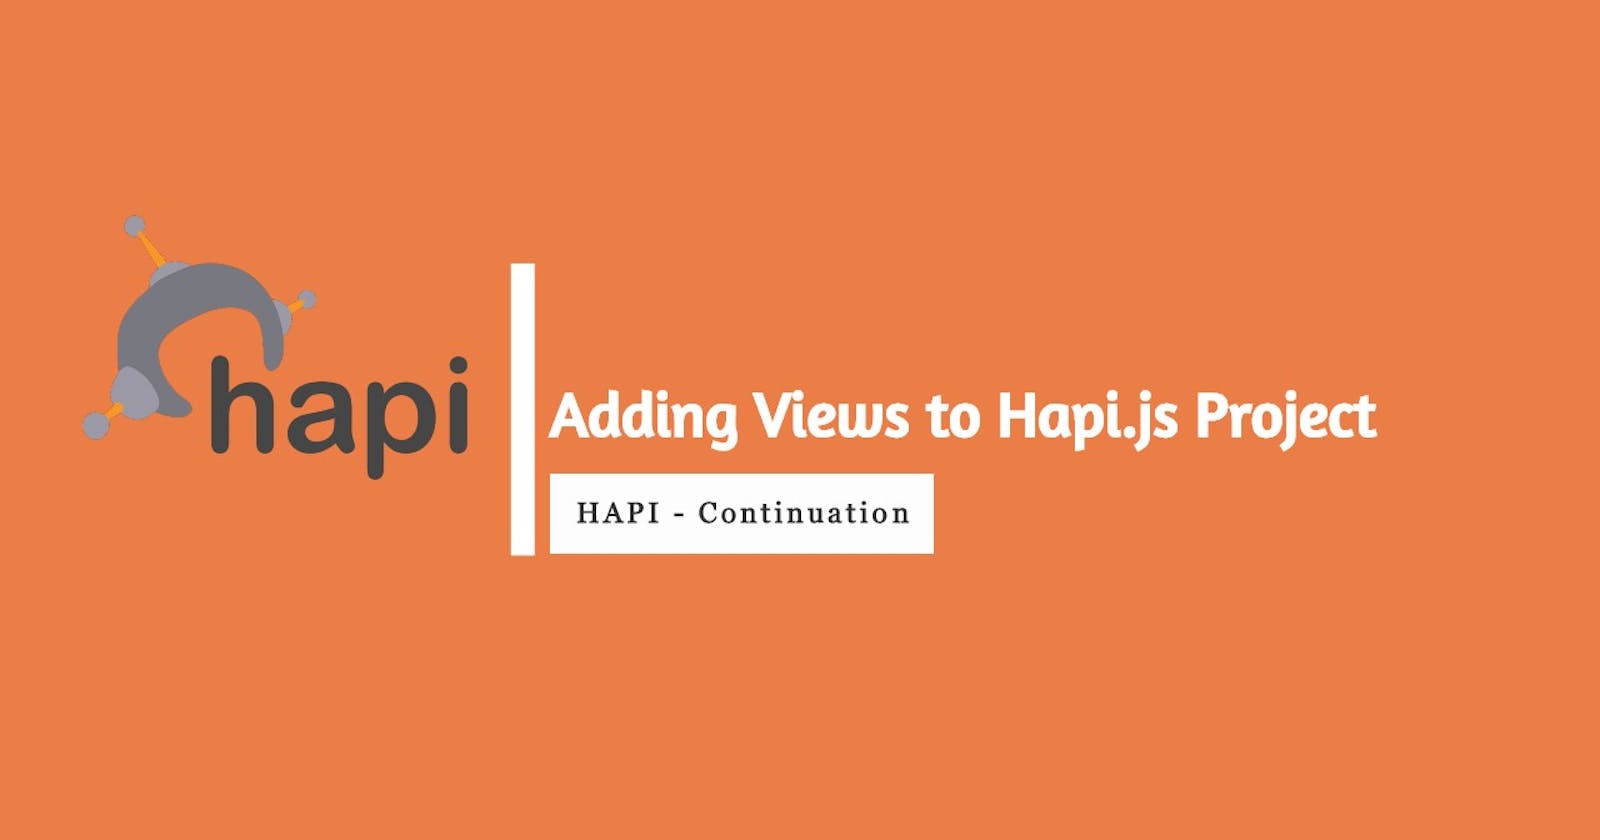 Add Views to your Hapi.js project with Vision